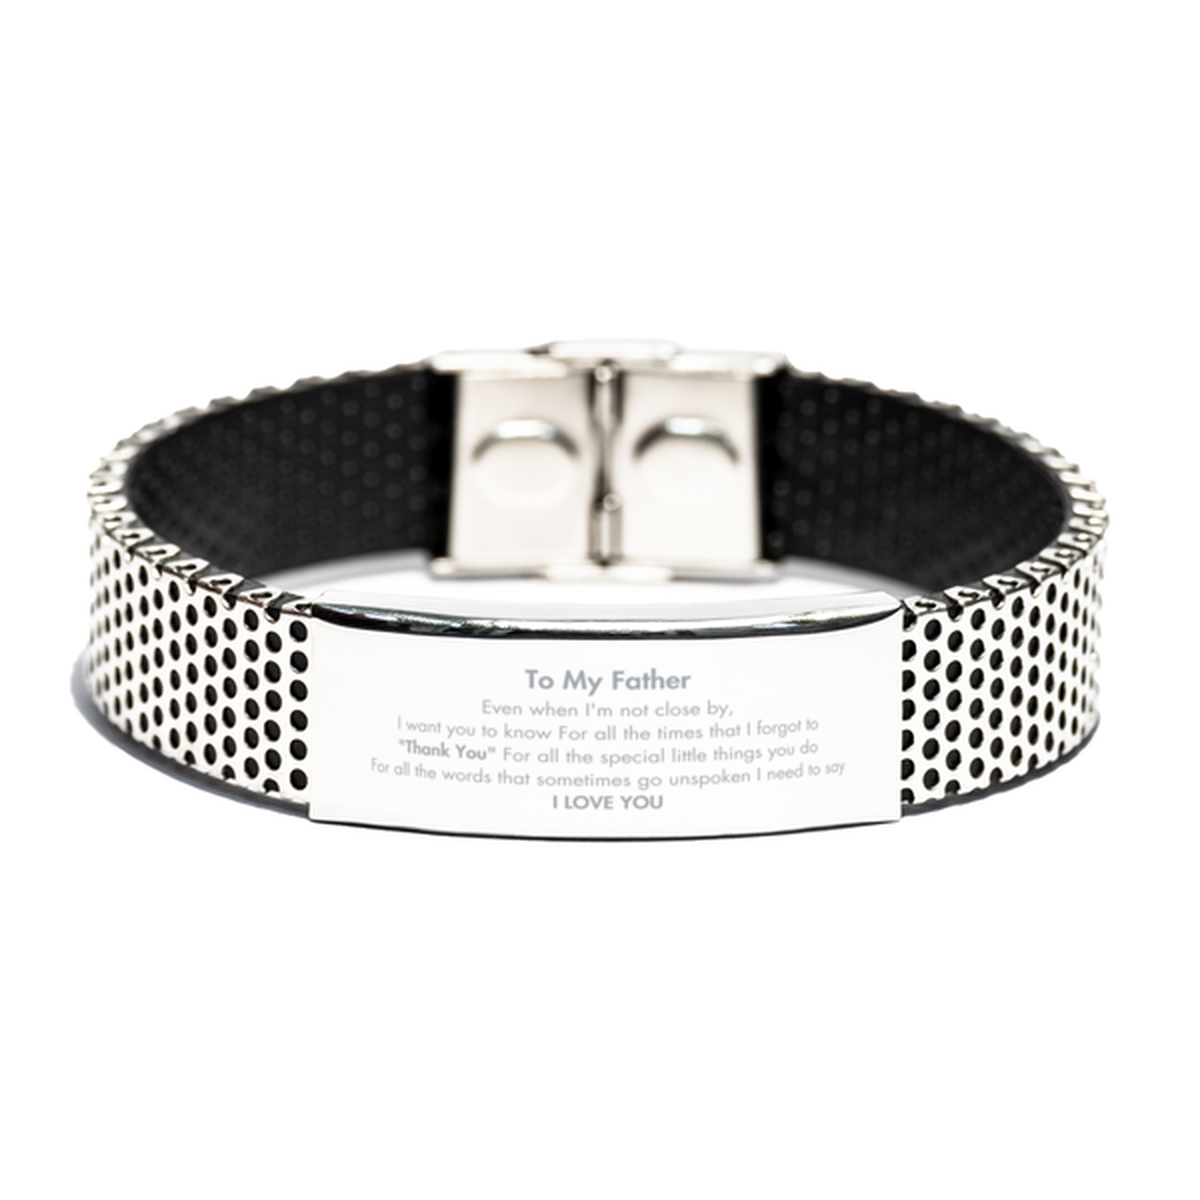 Thank You Gifts for Father, Keepsake Stainless Steel Bracelet Gifts for Father Birthday Mother's day Father's Day Father For all the words That sometimes go unspoken I need to say I LOVE YOU